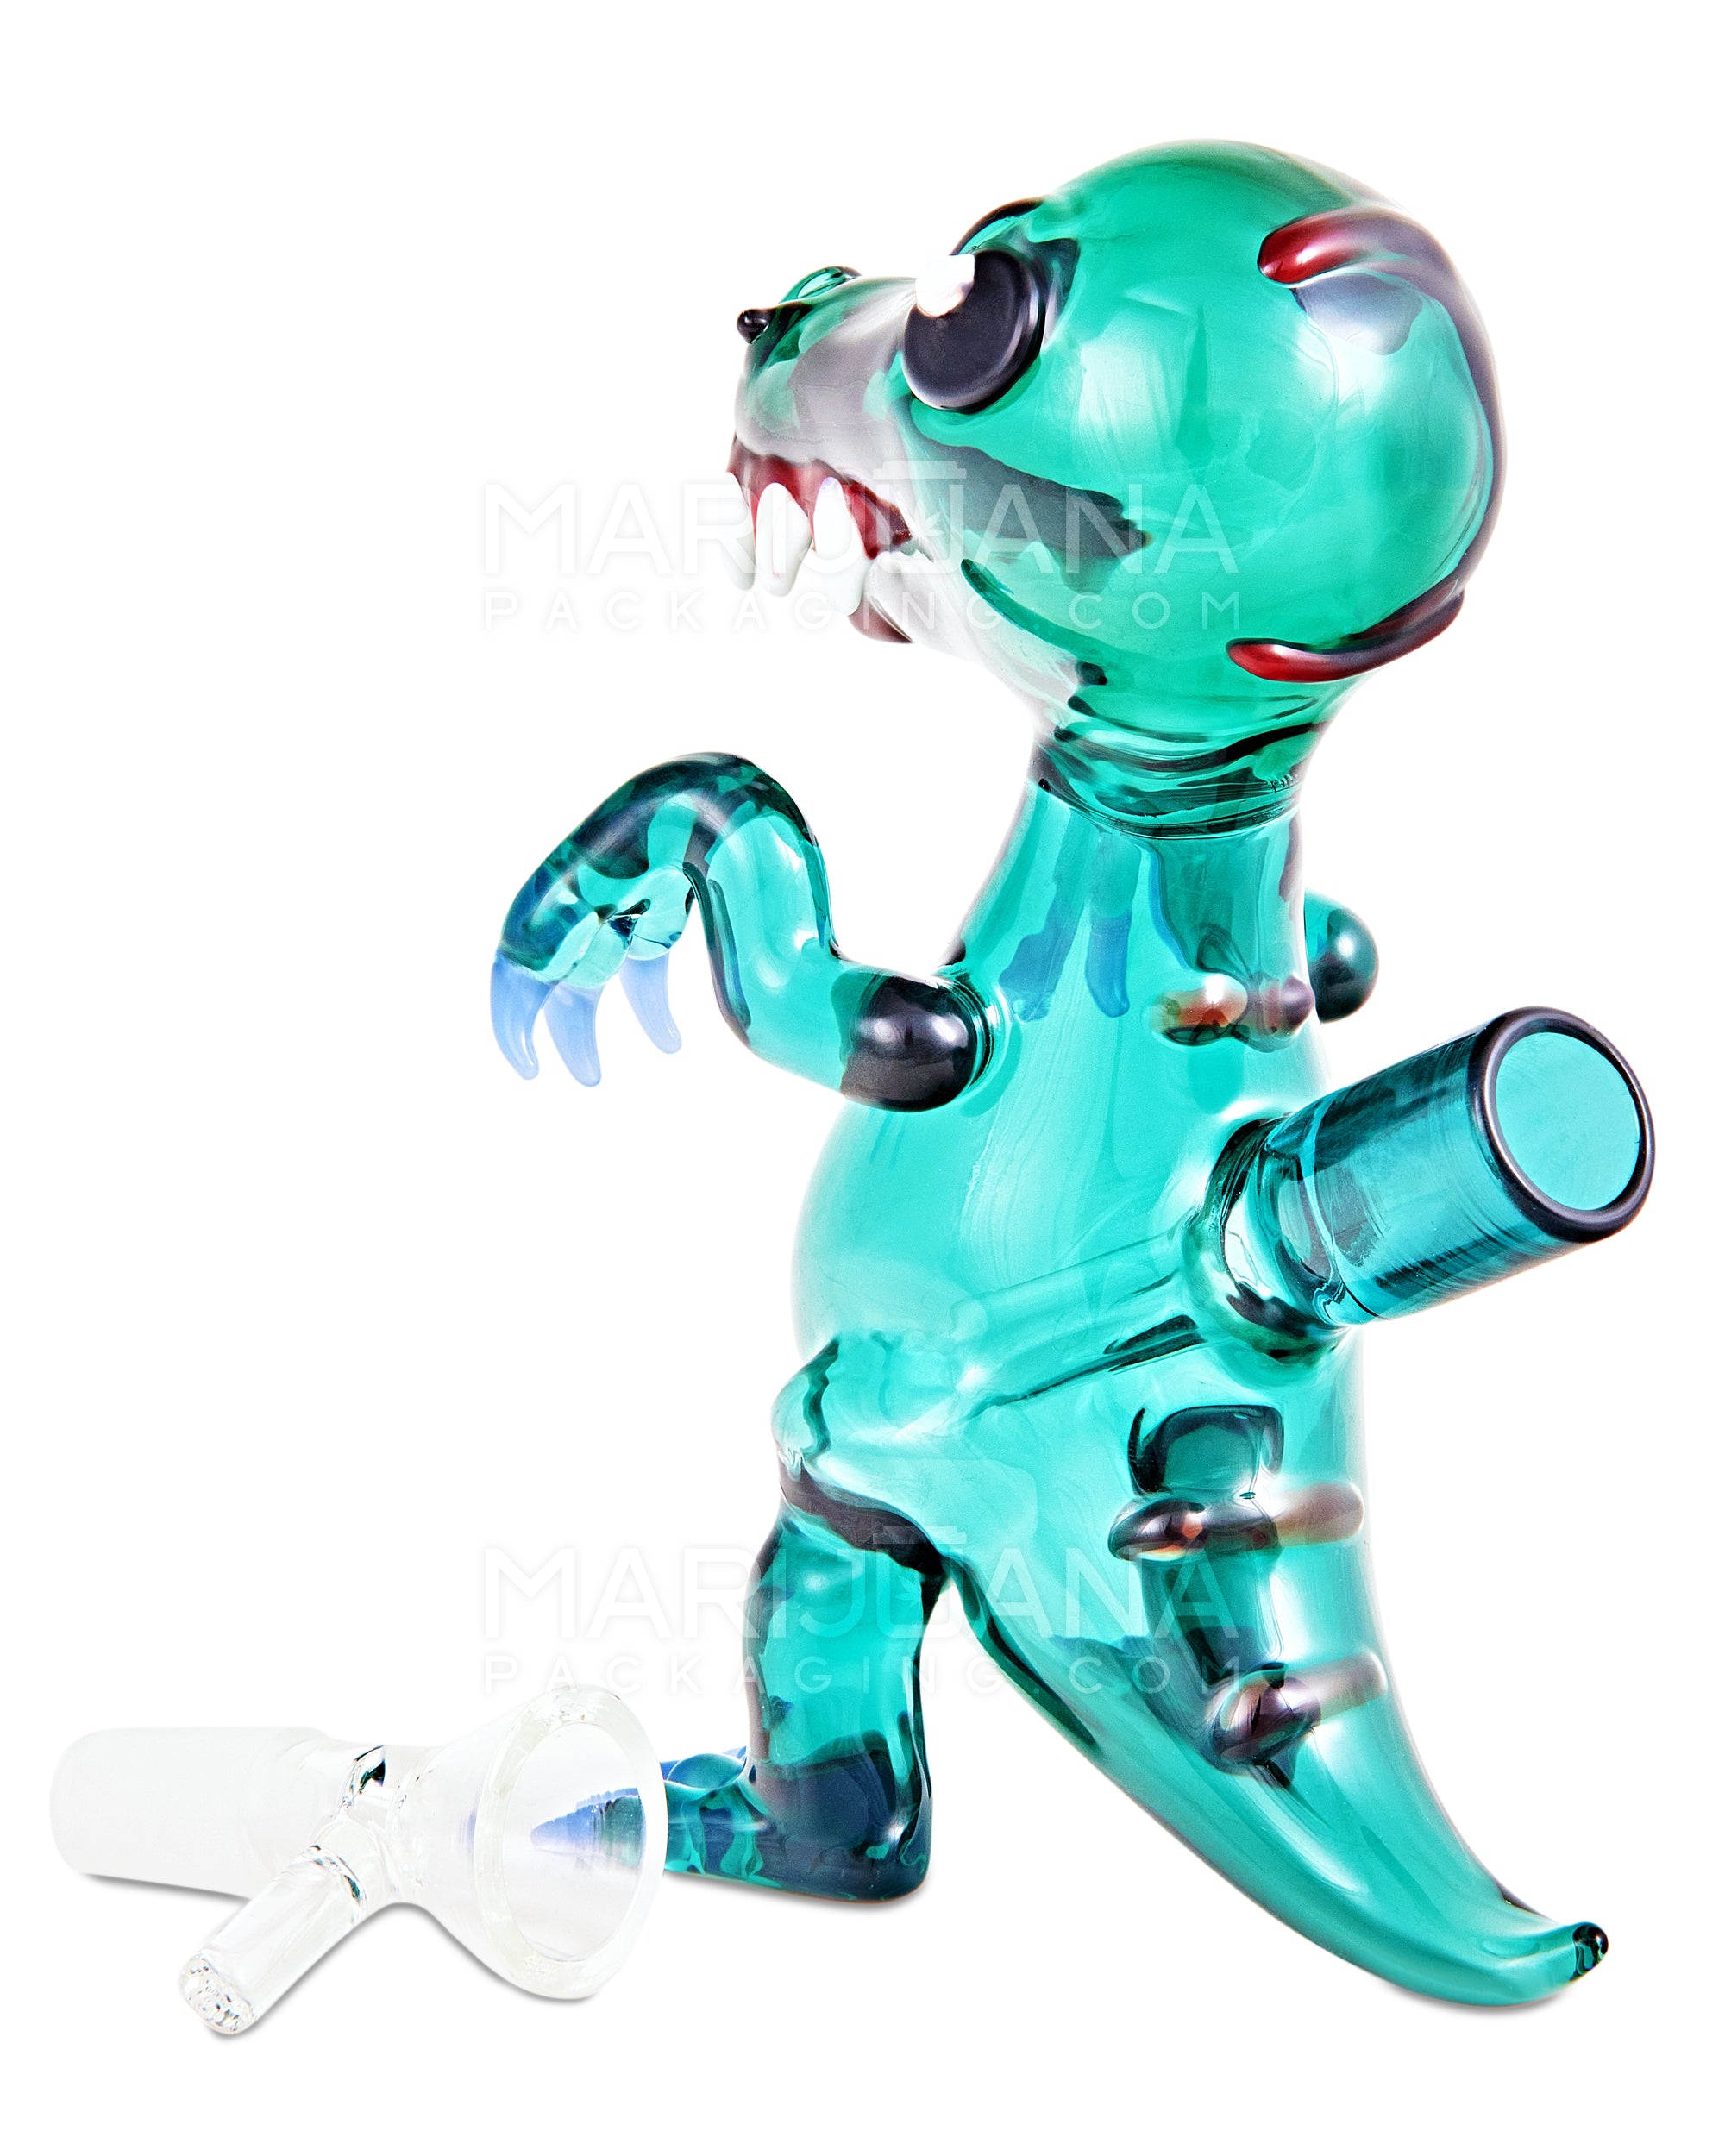 Heady | USA Glass Raptor Glass Dinosaur Water Pipe | 6in Tall - 14mm Bowl - Teal - 3